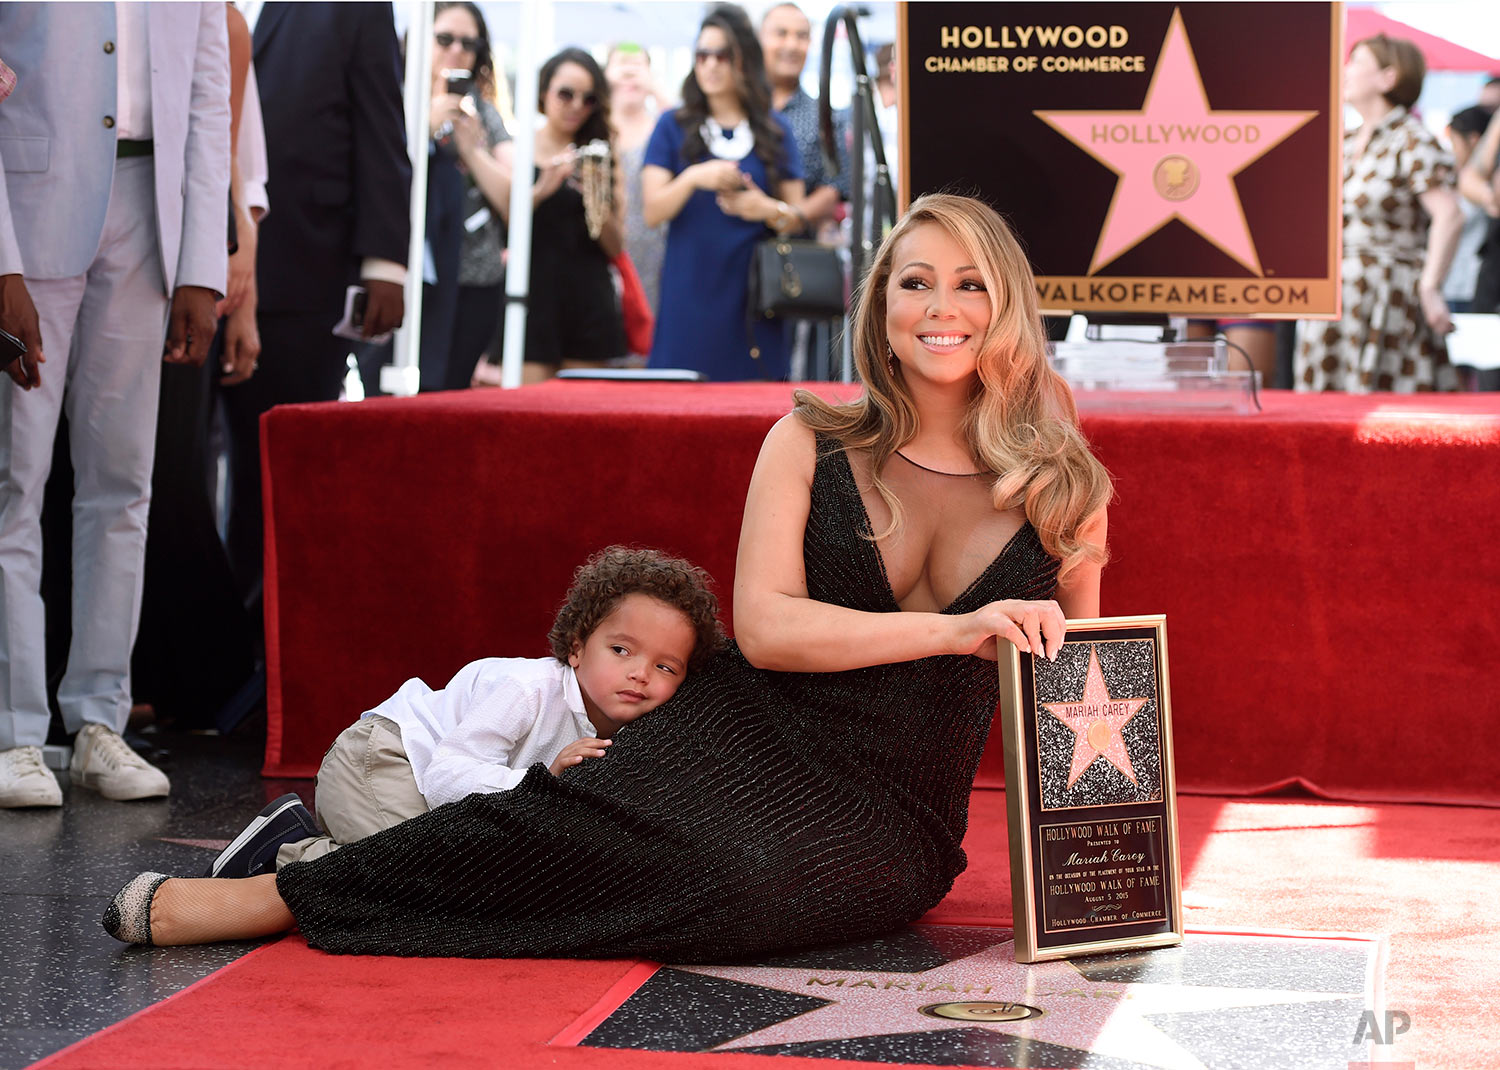  Mariah Carey, right, and her son Moroccan Cannon pose during a ceremony honoring Carey with a star on the Hollywood Walk of Fame on Wednesday, Aug. 5, 2015 in Los Angeles.  (Photo by Chris Pizzello/Invision/AP) 